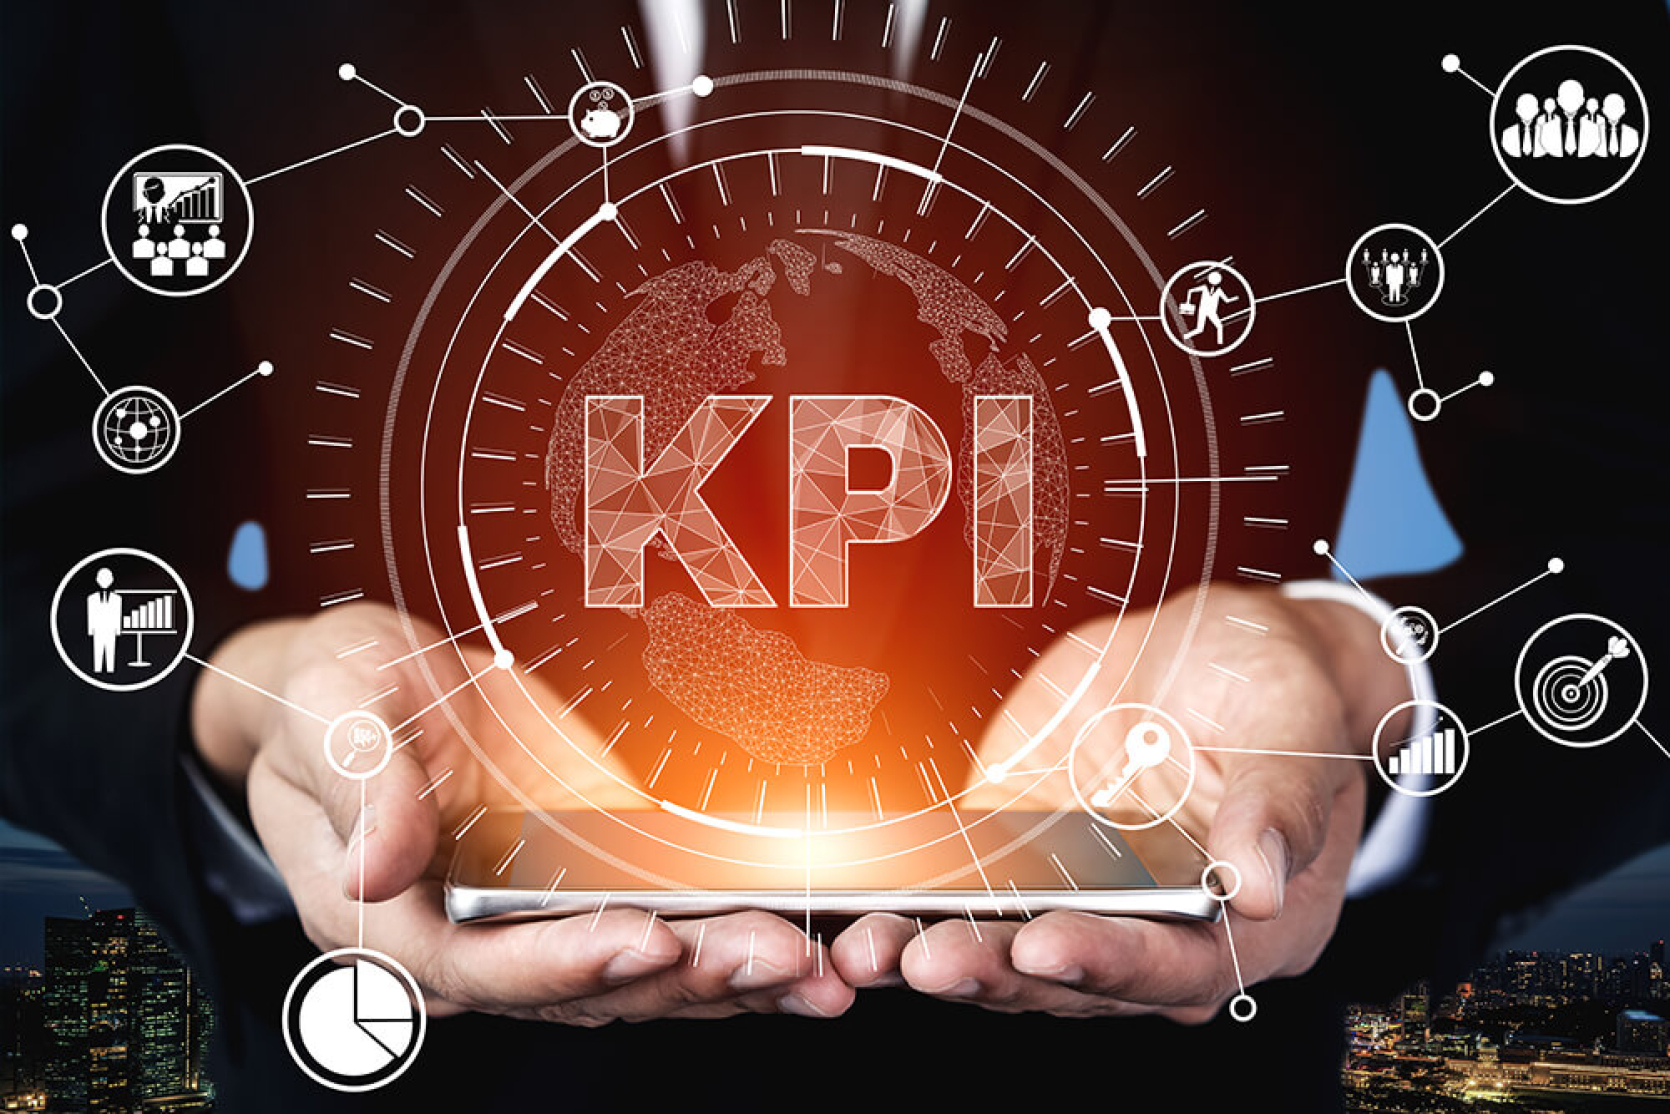 KPIS FOR DIGITIZATION: HOW TO MEASURE PROJECT PROGRESS